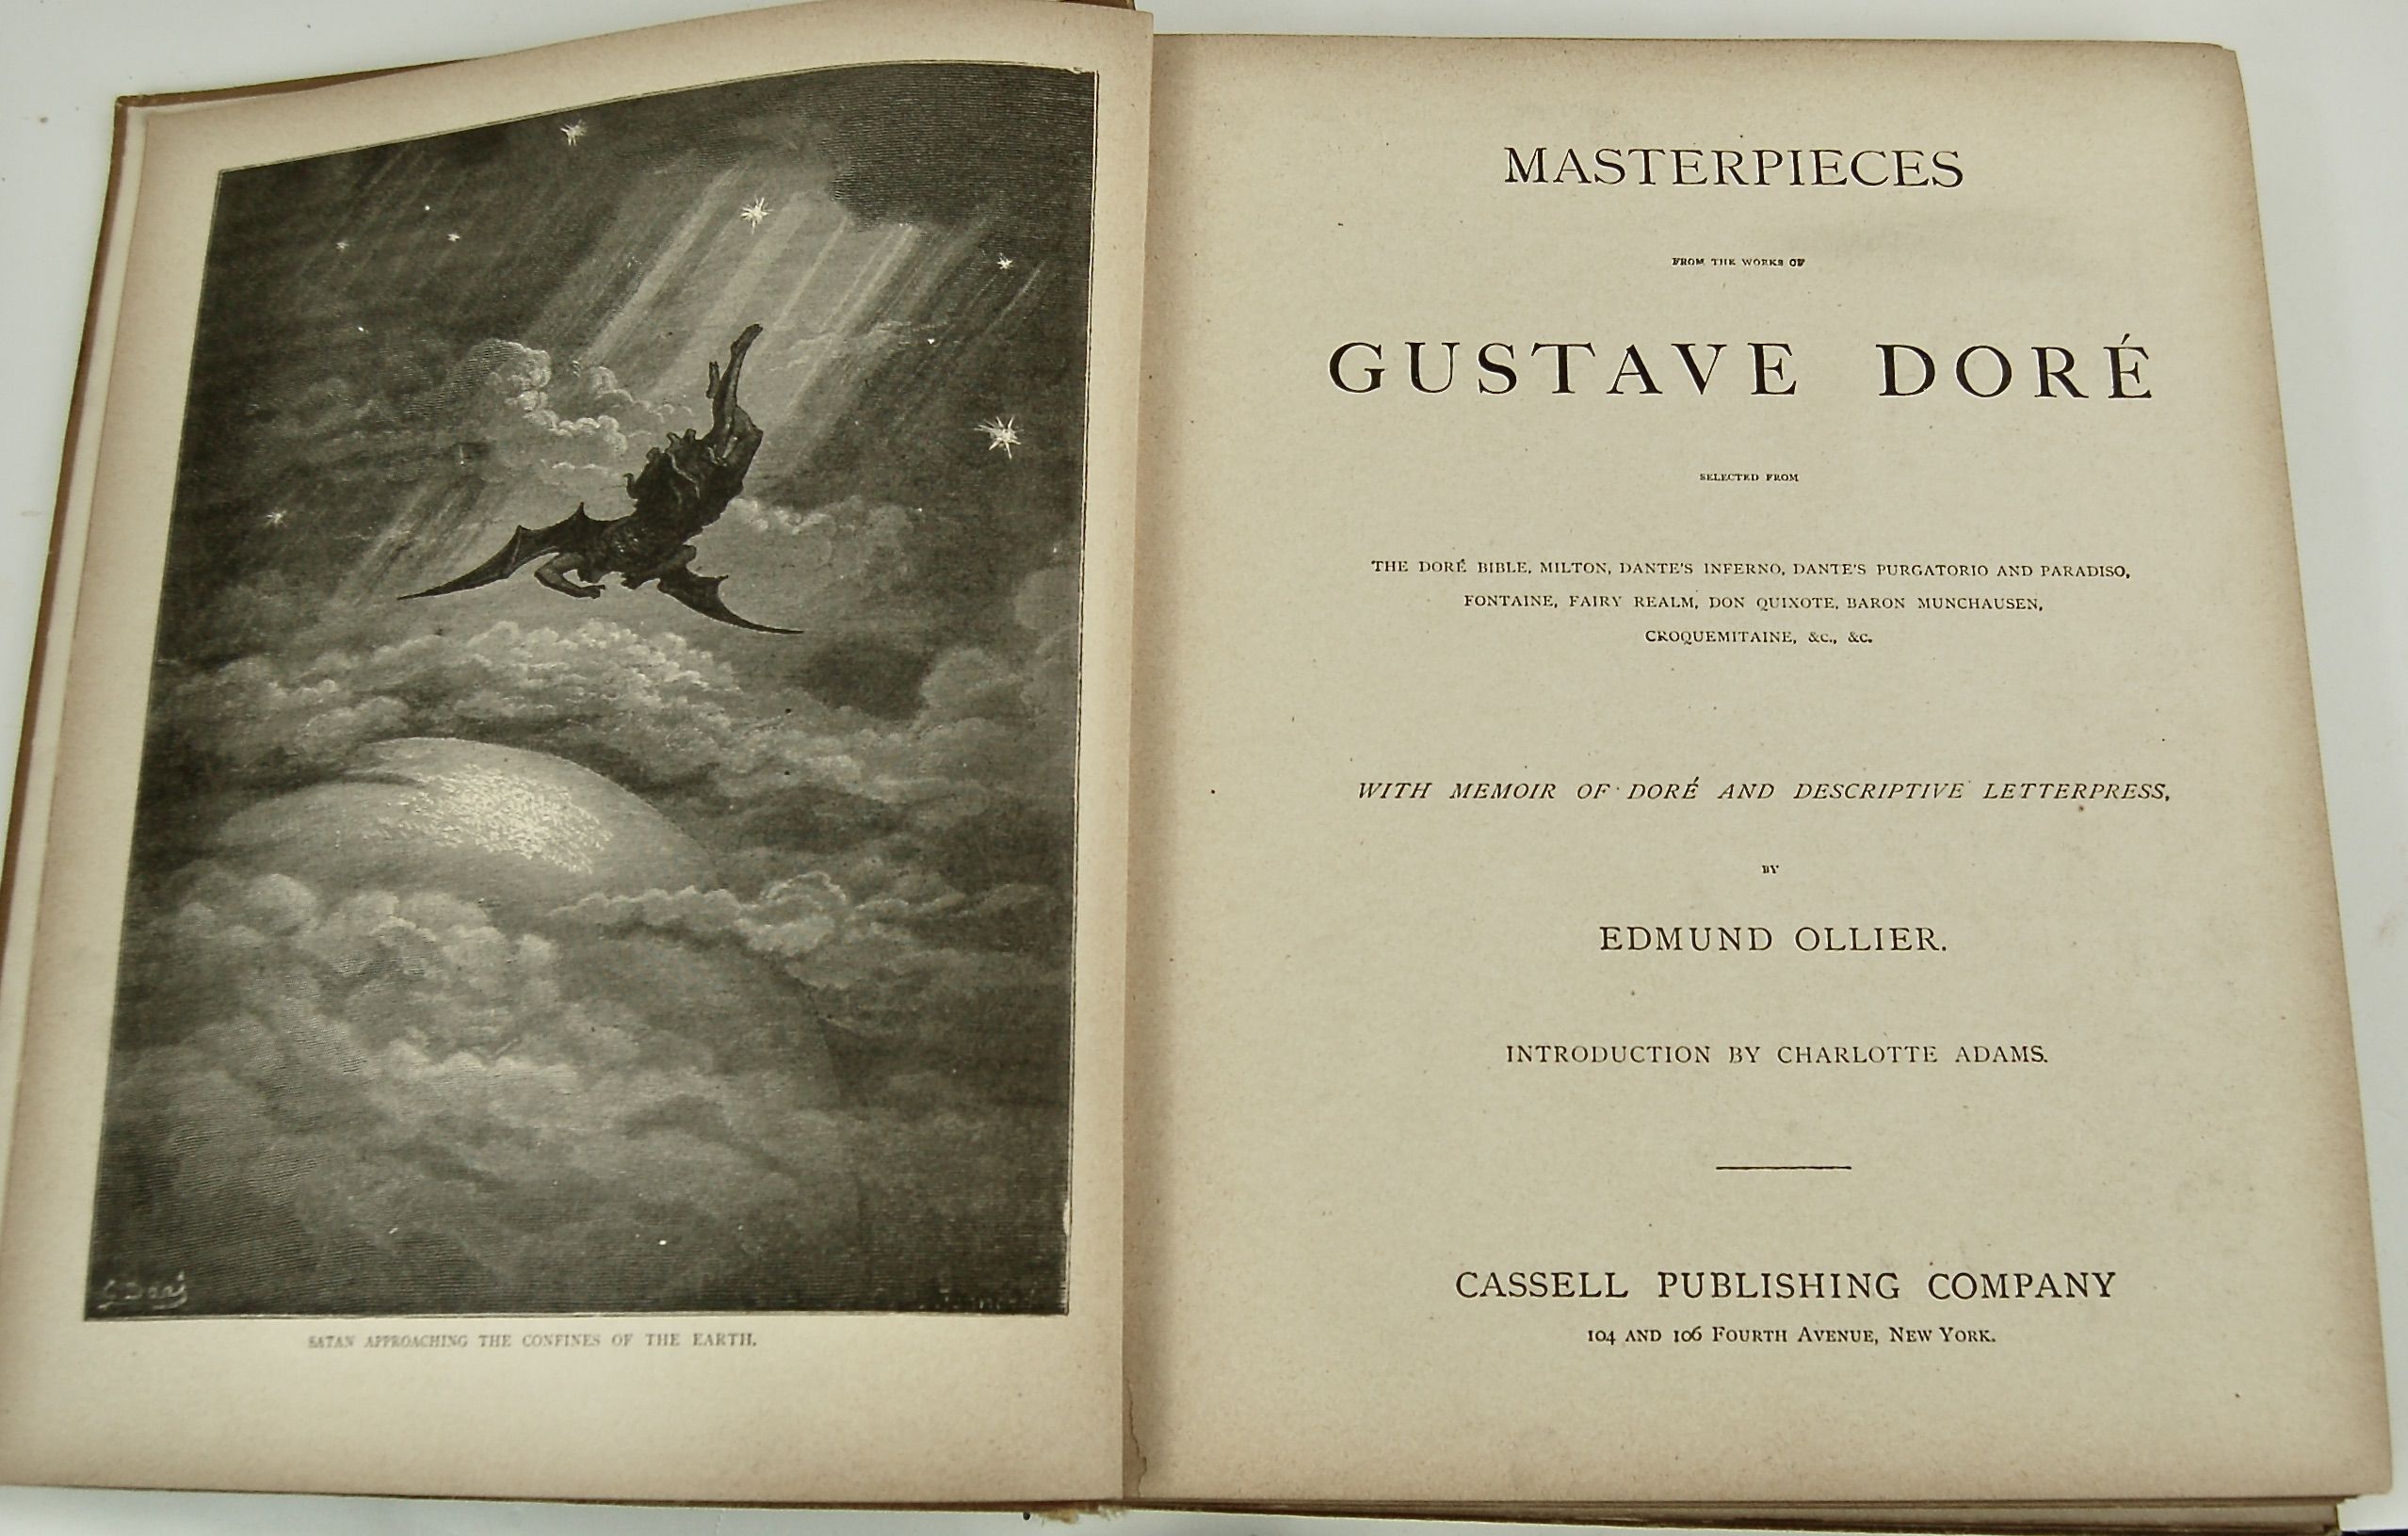  Masterpieces from the Works of Gustave Doré.